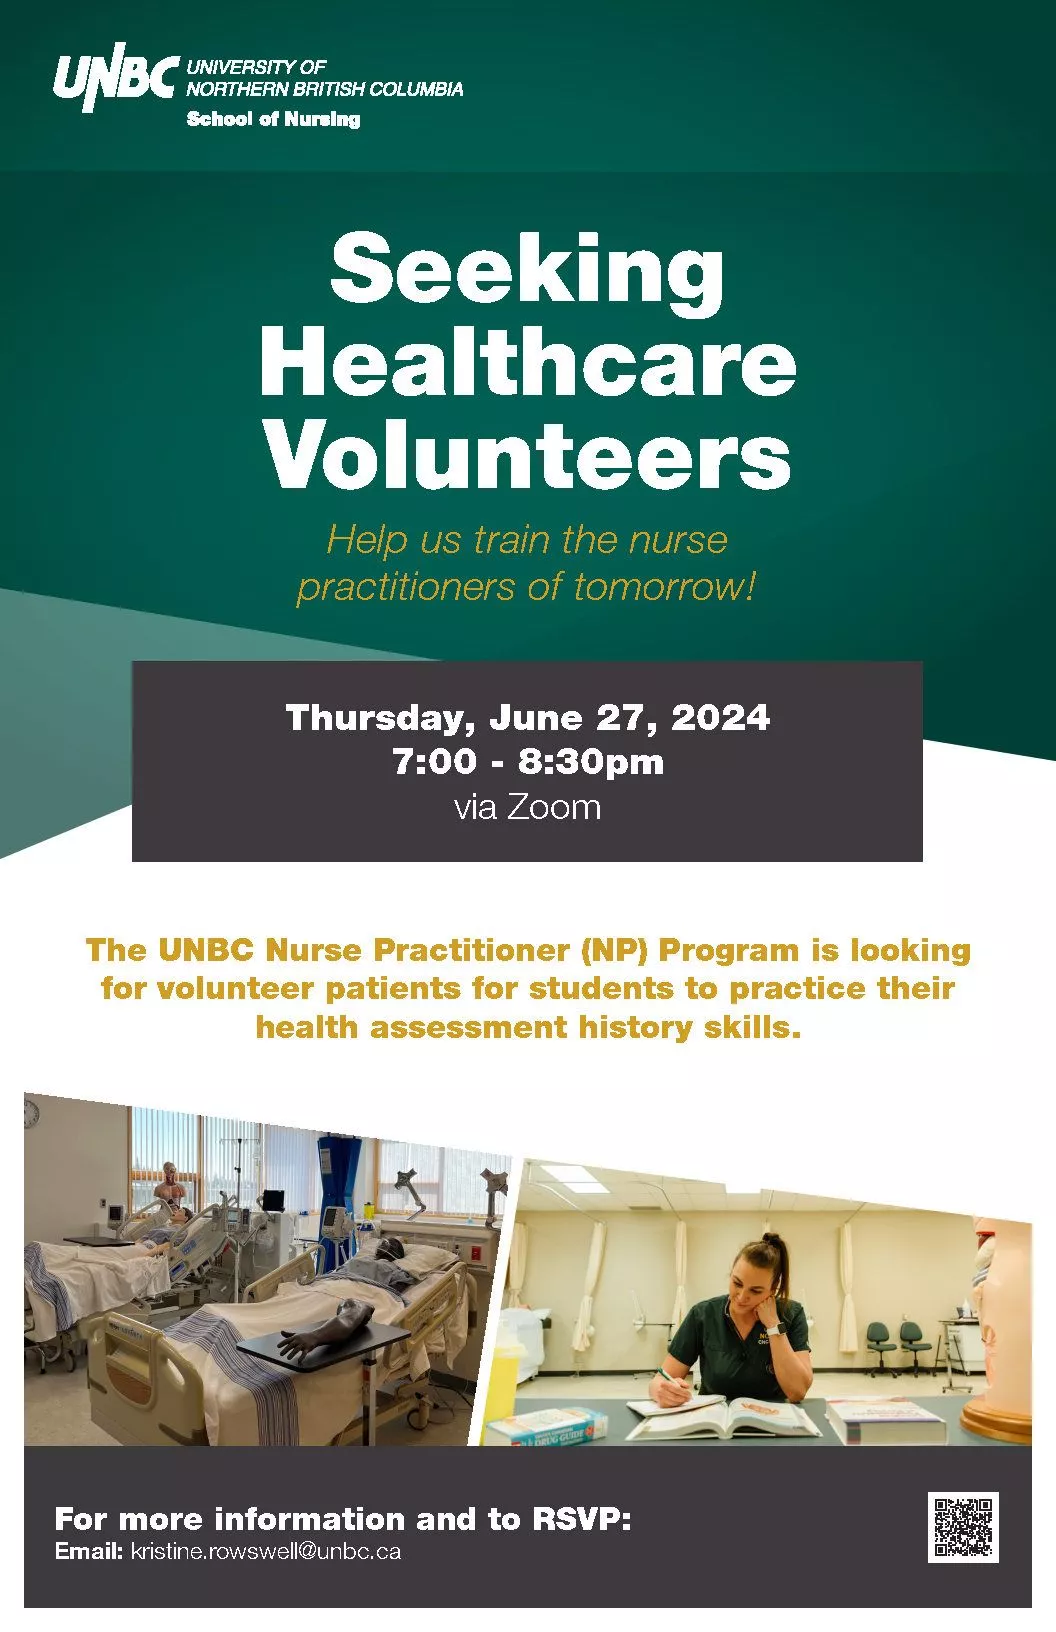 Poster indicating that Healthcare Volunteers are being sought for a June 27th evening event.